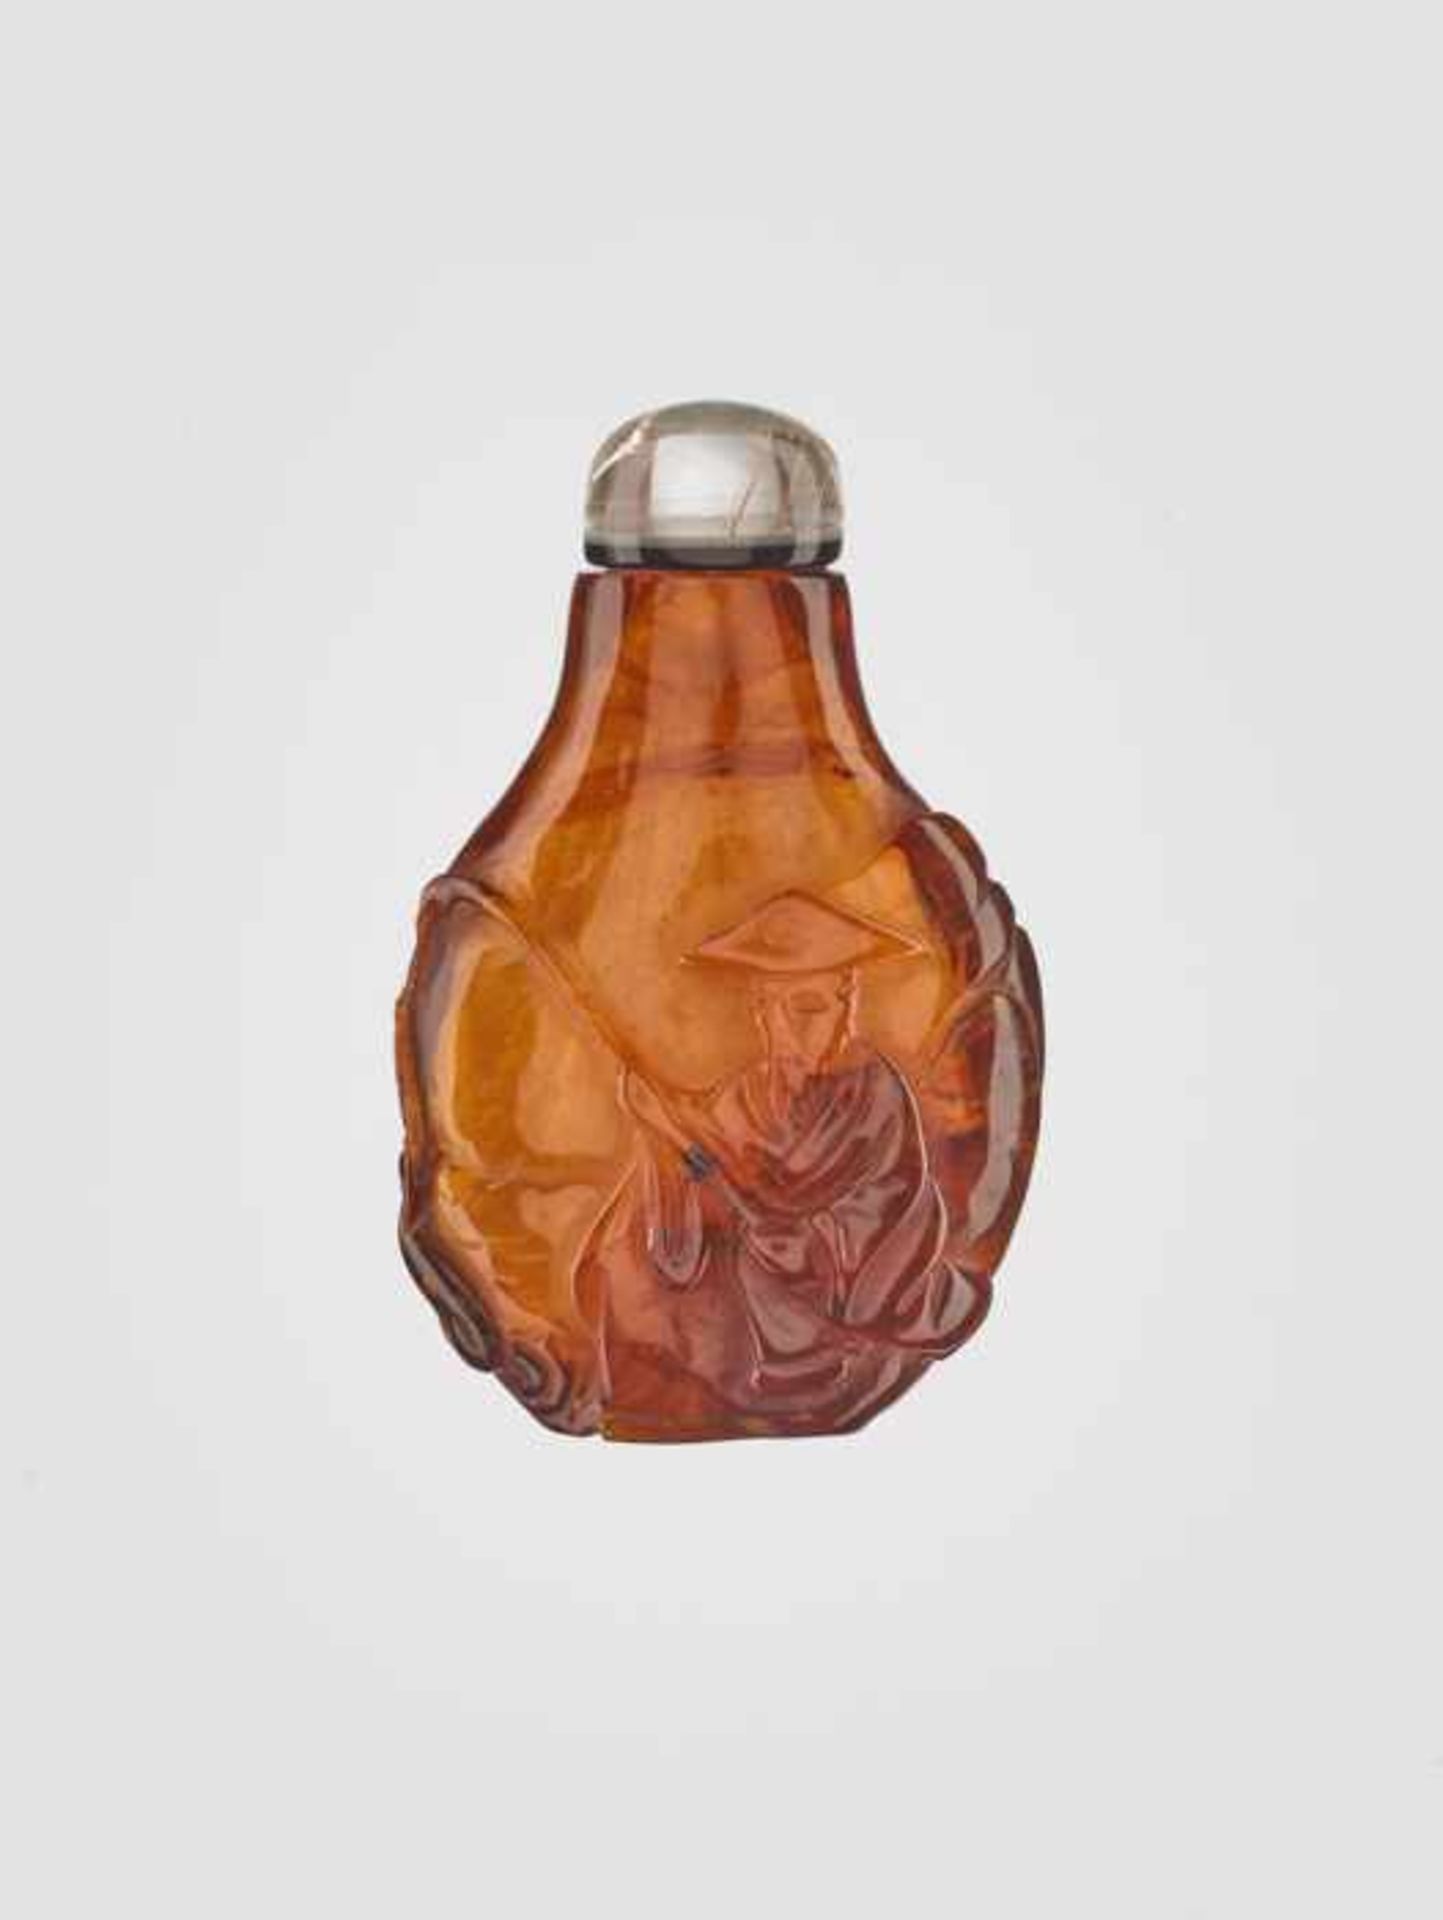 A MINIATURE AMBER ‘FISHERMAN’ SNUFF BOTTLE, EARLY 19th CENTURY Transparent amber of untreated